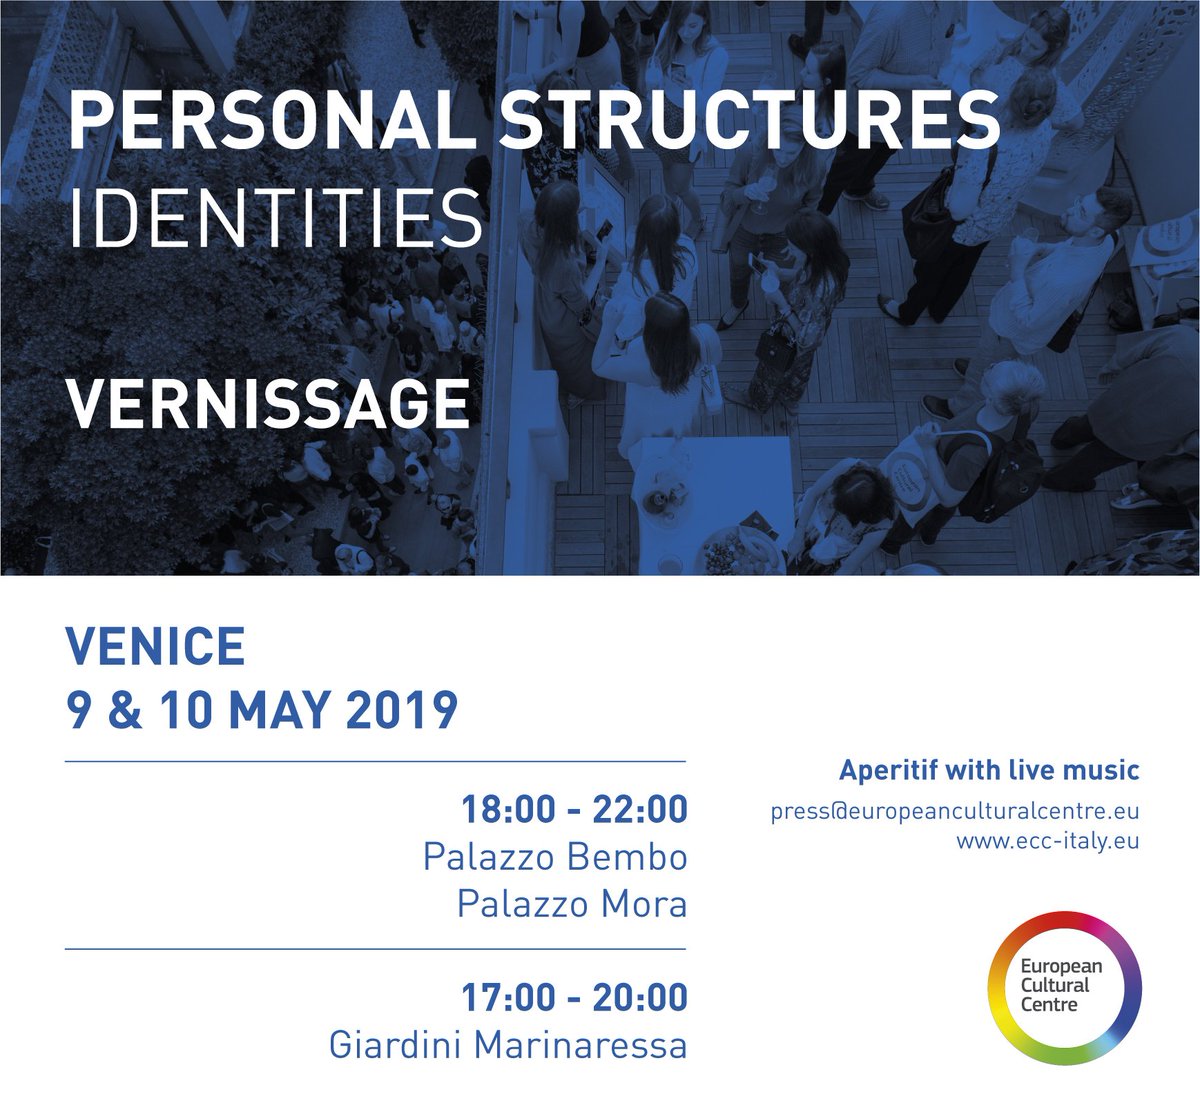 it's official ! thrilled and looking forward to the opening of 'Personal Structures' as part of the Venice Biennale from 11th-24th November 2019. Can't wait to see my work up in Palazzo Bembo. @art_consult #artcollectors #contemporaryart #artconsultants